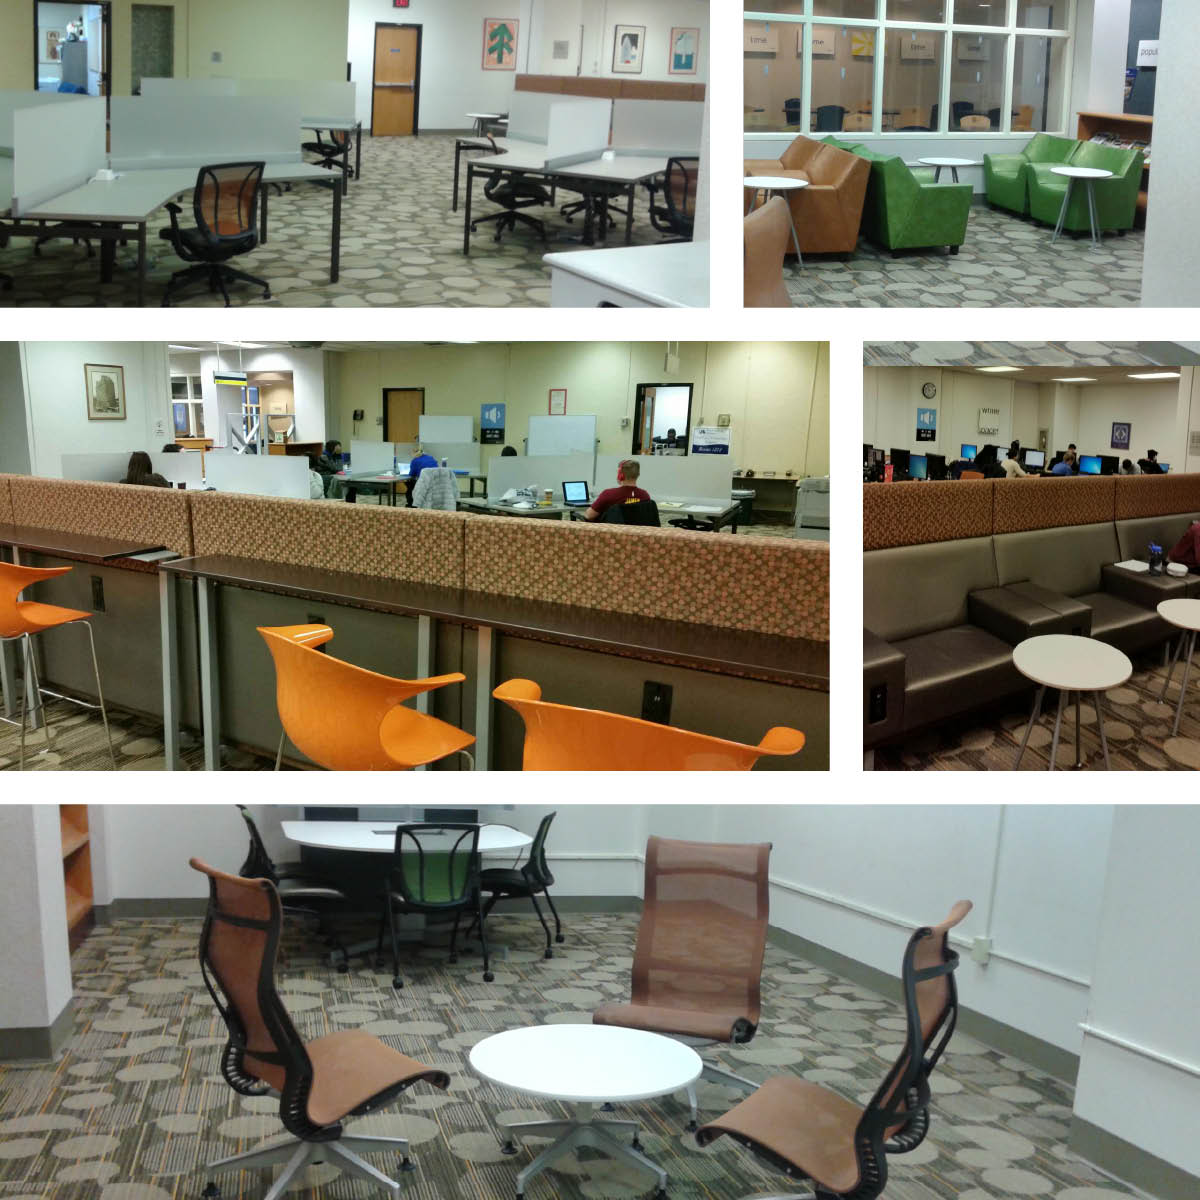 A collage of 6 images of upgrades made in Hahnemann Library. Top: new desks and new chairs, middle: new 'bar'seating and hightop chairs; Bottom: new group or solo study chairs and tables